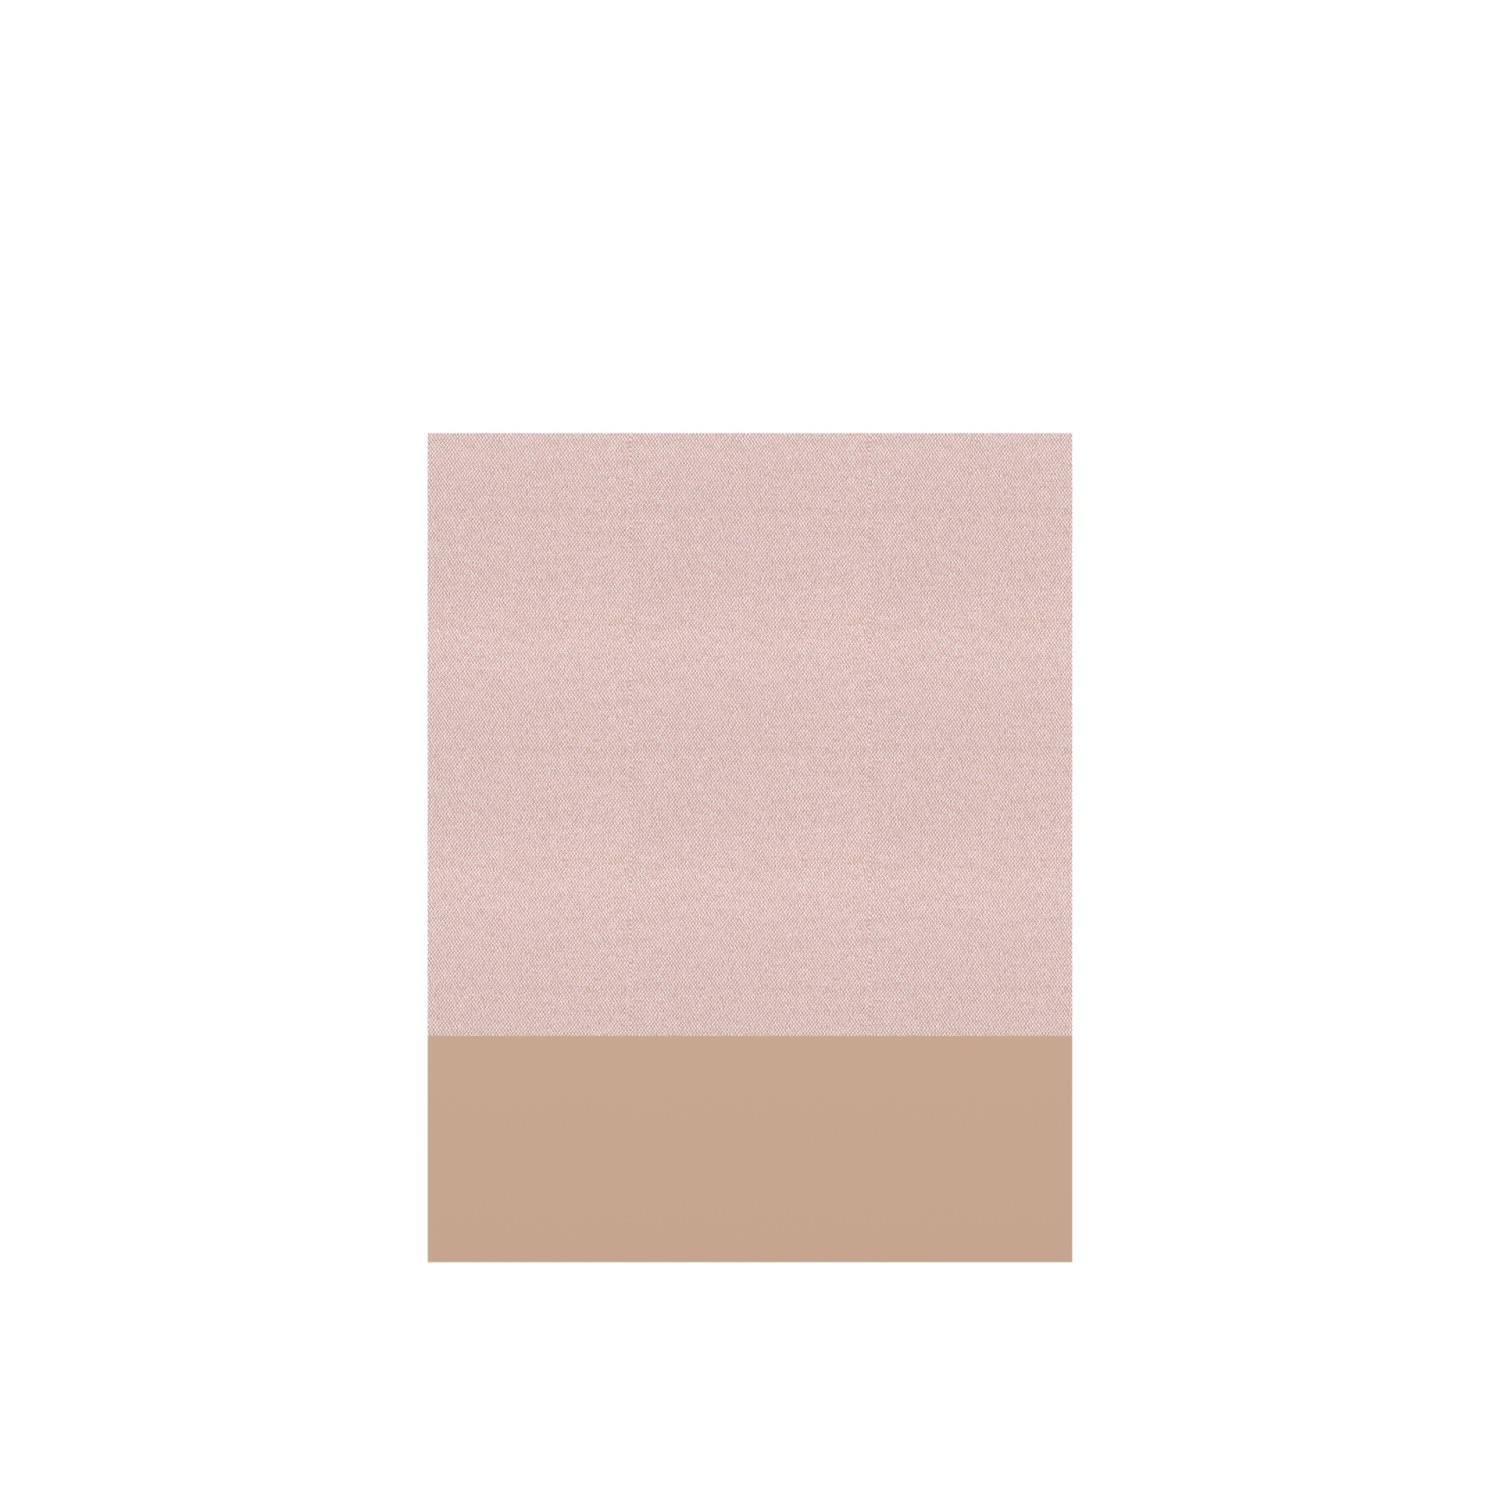 Front Wall 123x160 Frame Grey Beige, Panel Pink